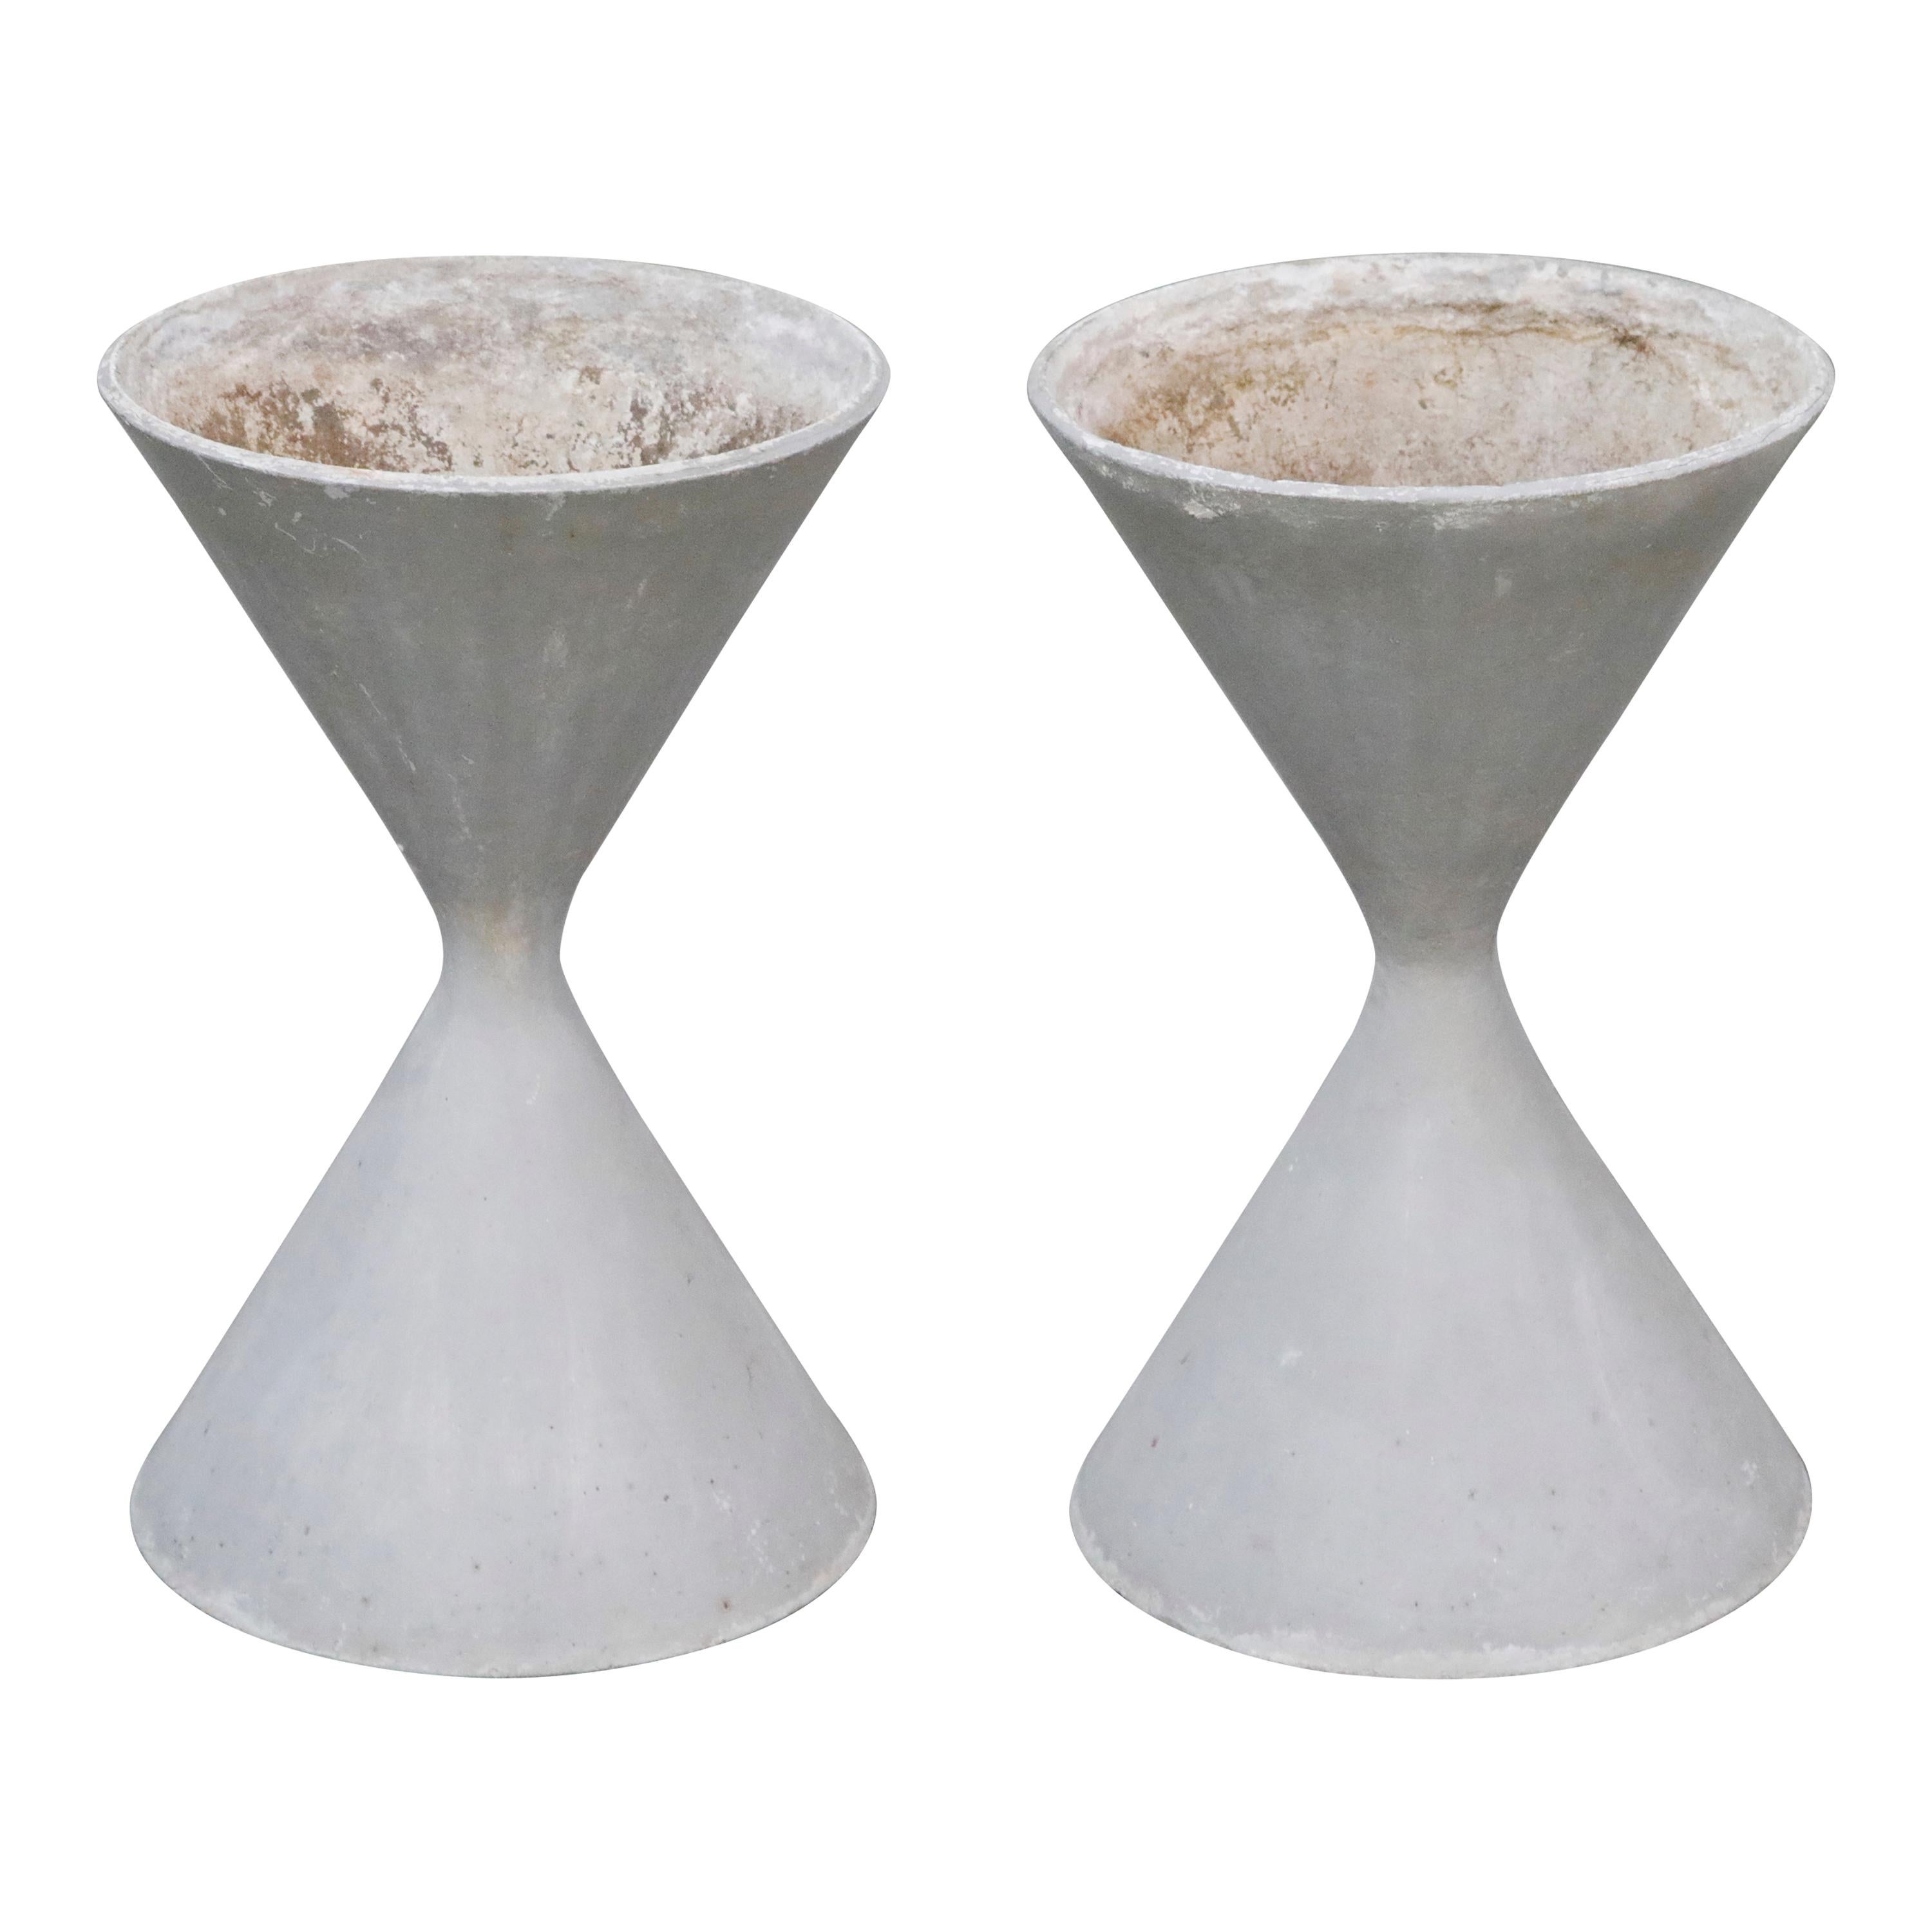 Pair of Willy Guhl for Eternit 'Diablo' Hourglass Concrete Planters, Signed